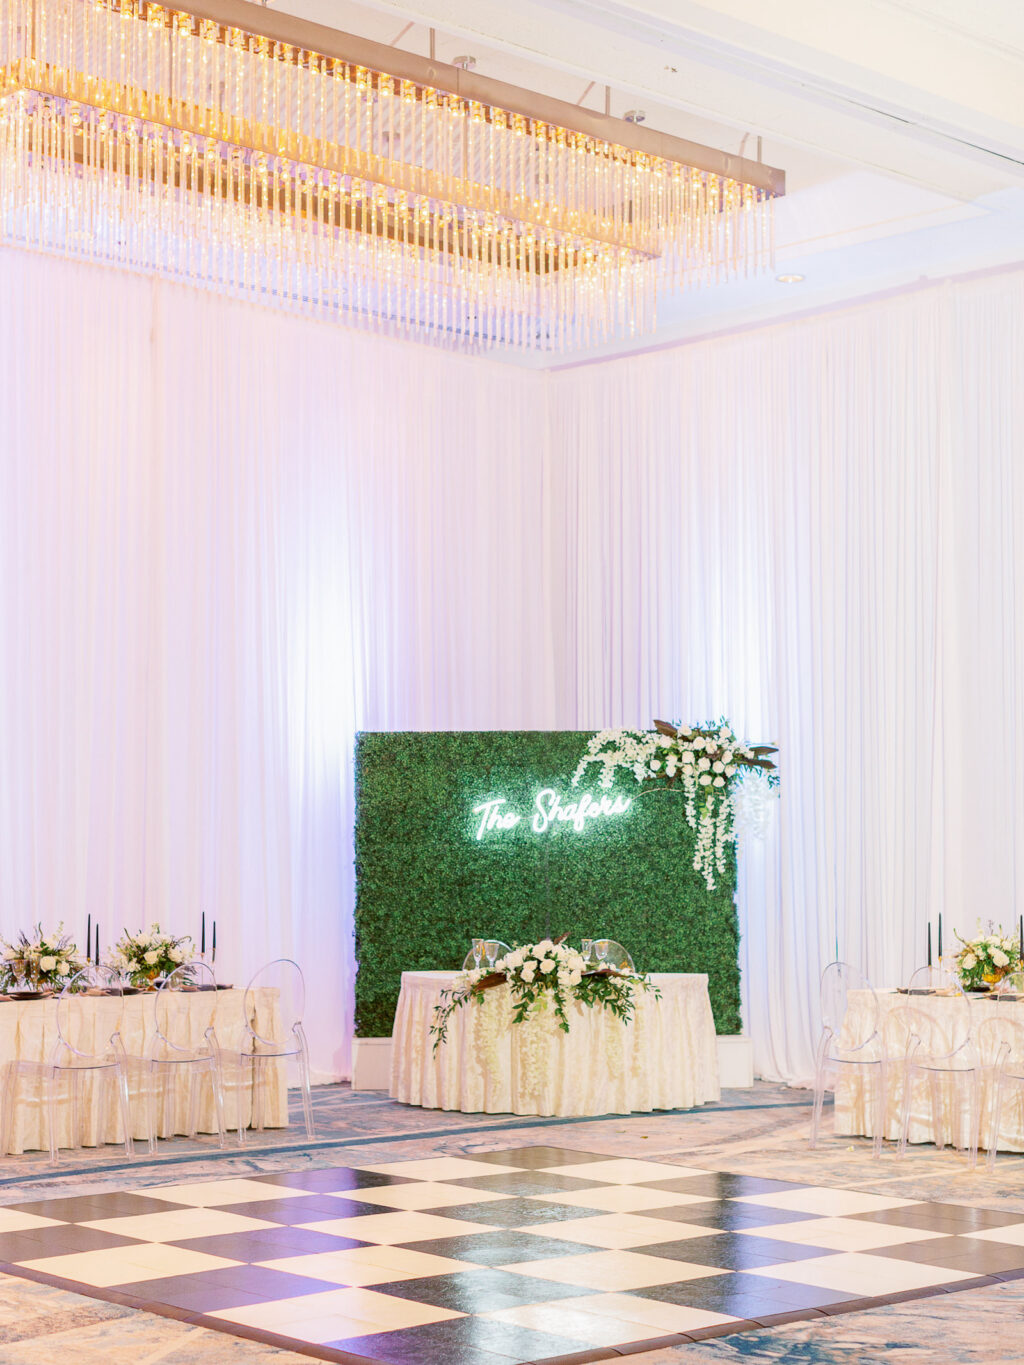 Wedding Reception Dance Floor and Sweetheart Table with Greenery Backdrop and Neon Sign | Hilton Downtown Tampa | Gabro Event Services